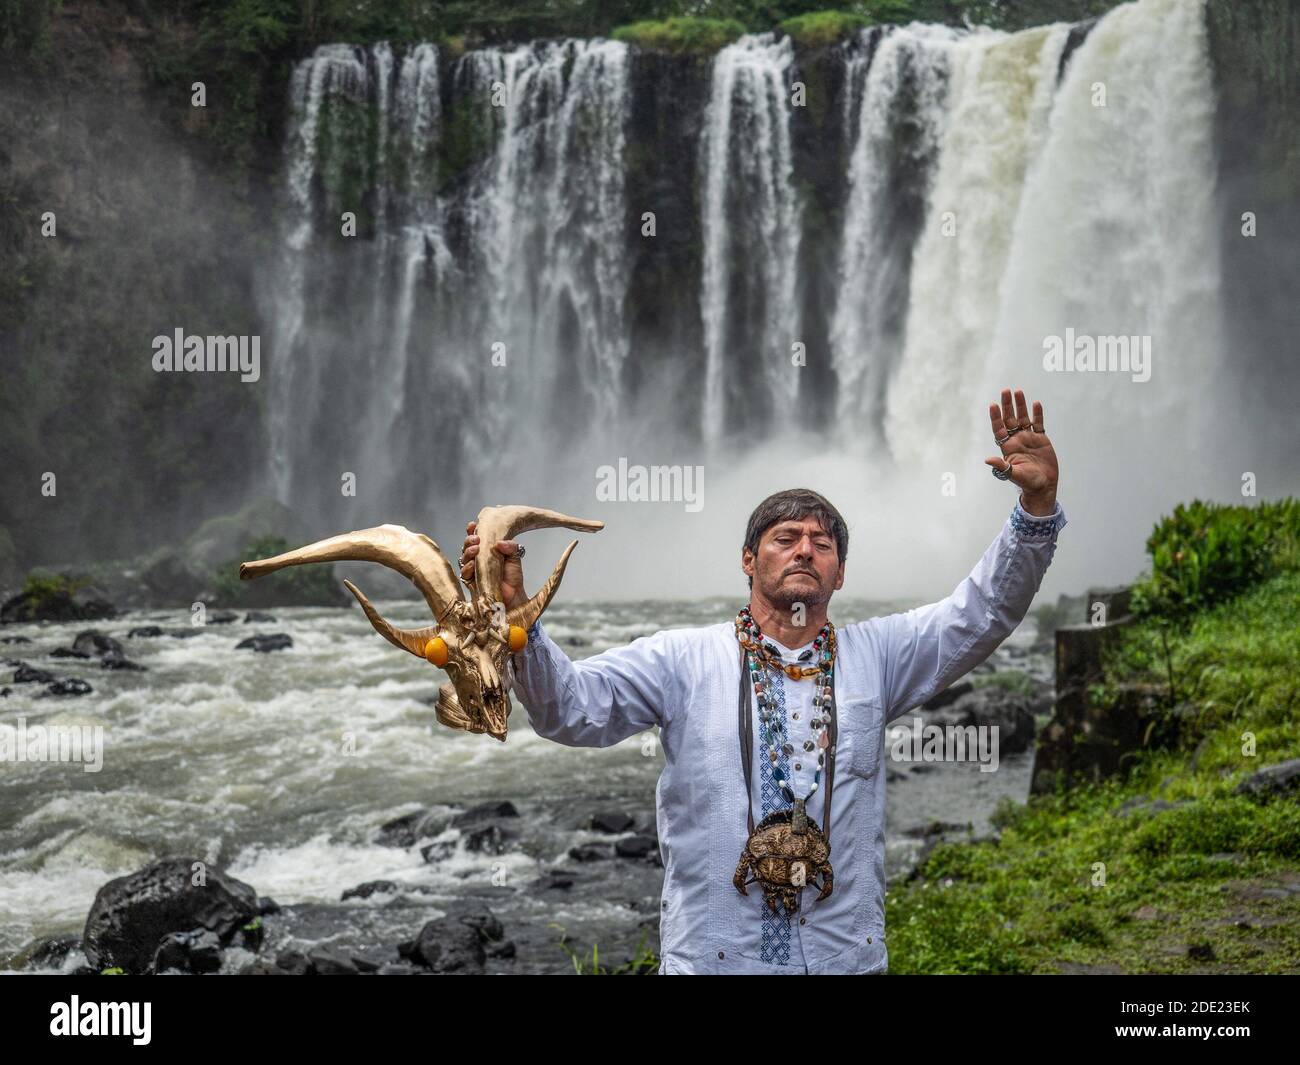 Enrique Marthen Bedron performs a cleaning ritual next to the Salto de  Eyipantla waterfall. Work of traditional shamans of Catemaco called 